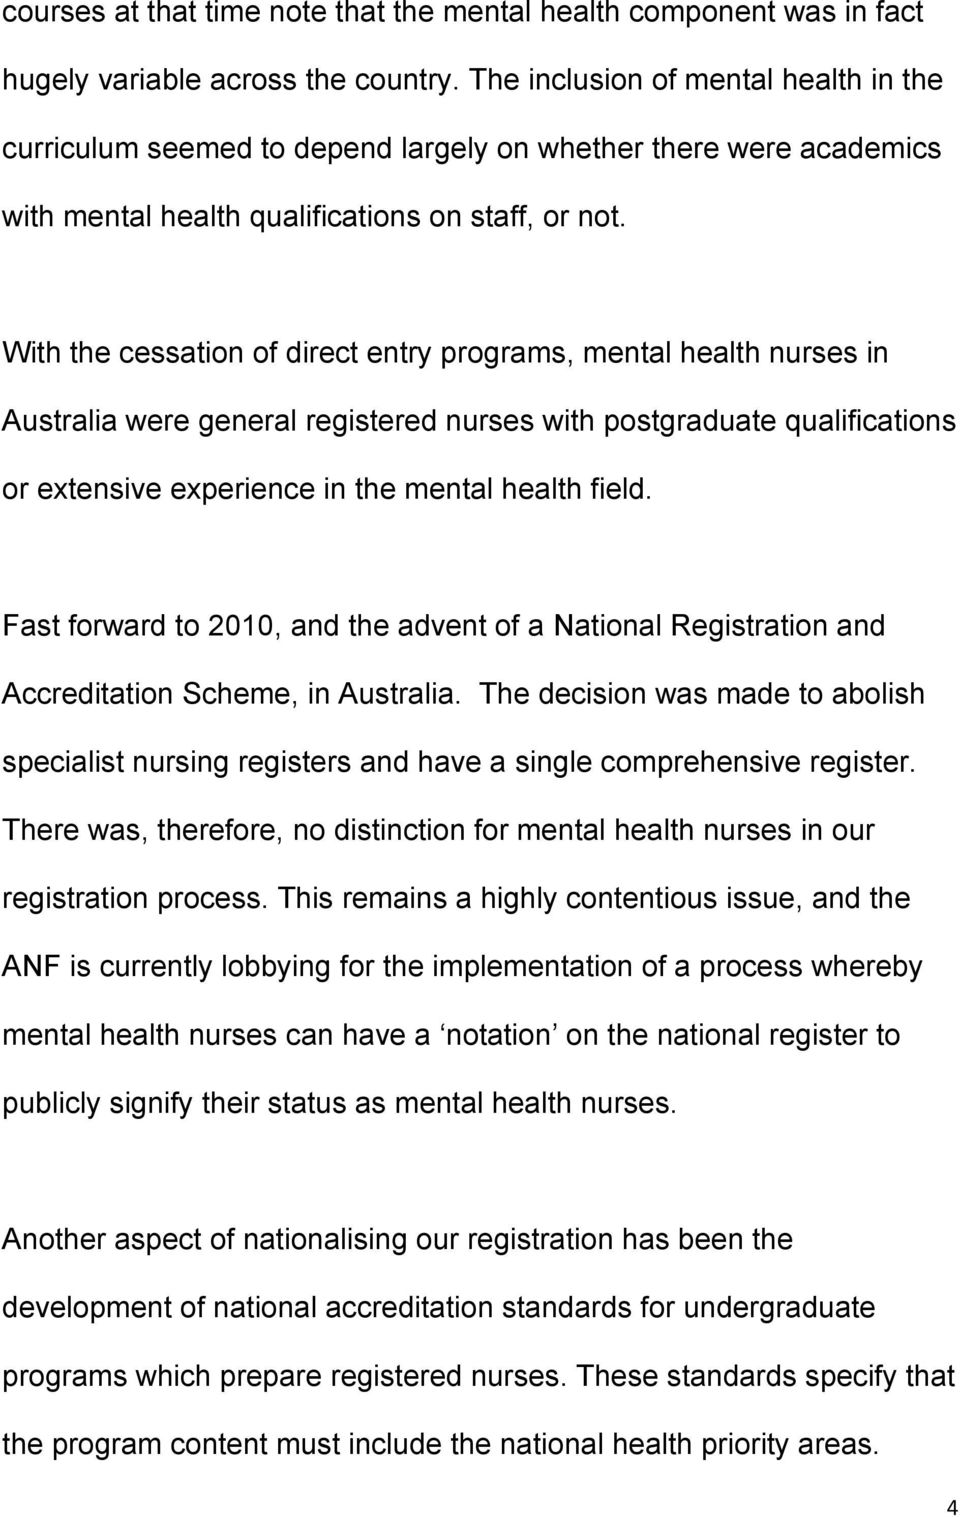 With the cessation of direct entry programs, mental health nurses in Australia were general registered nurses with postgraduate qualifications or extensive experience in the mental health field.